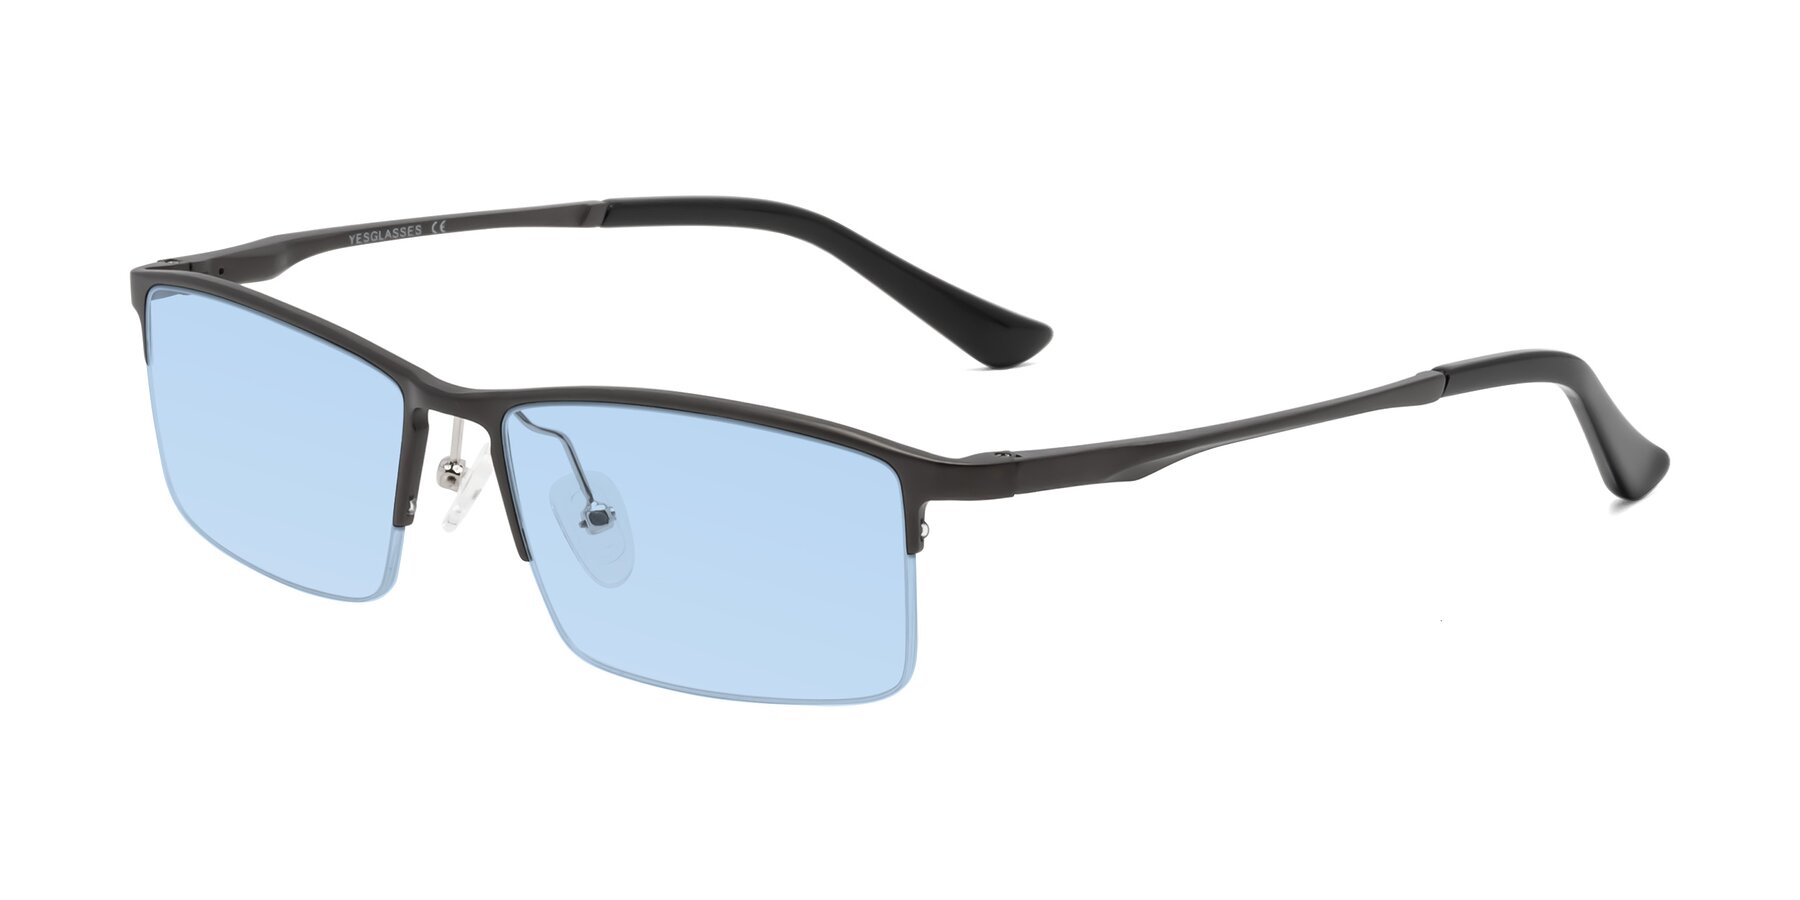 Angle of CX6263 in Gunmetal with Light Blue Tinted Lenses